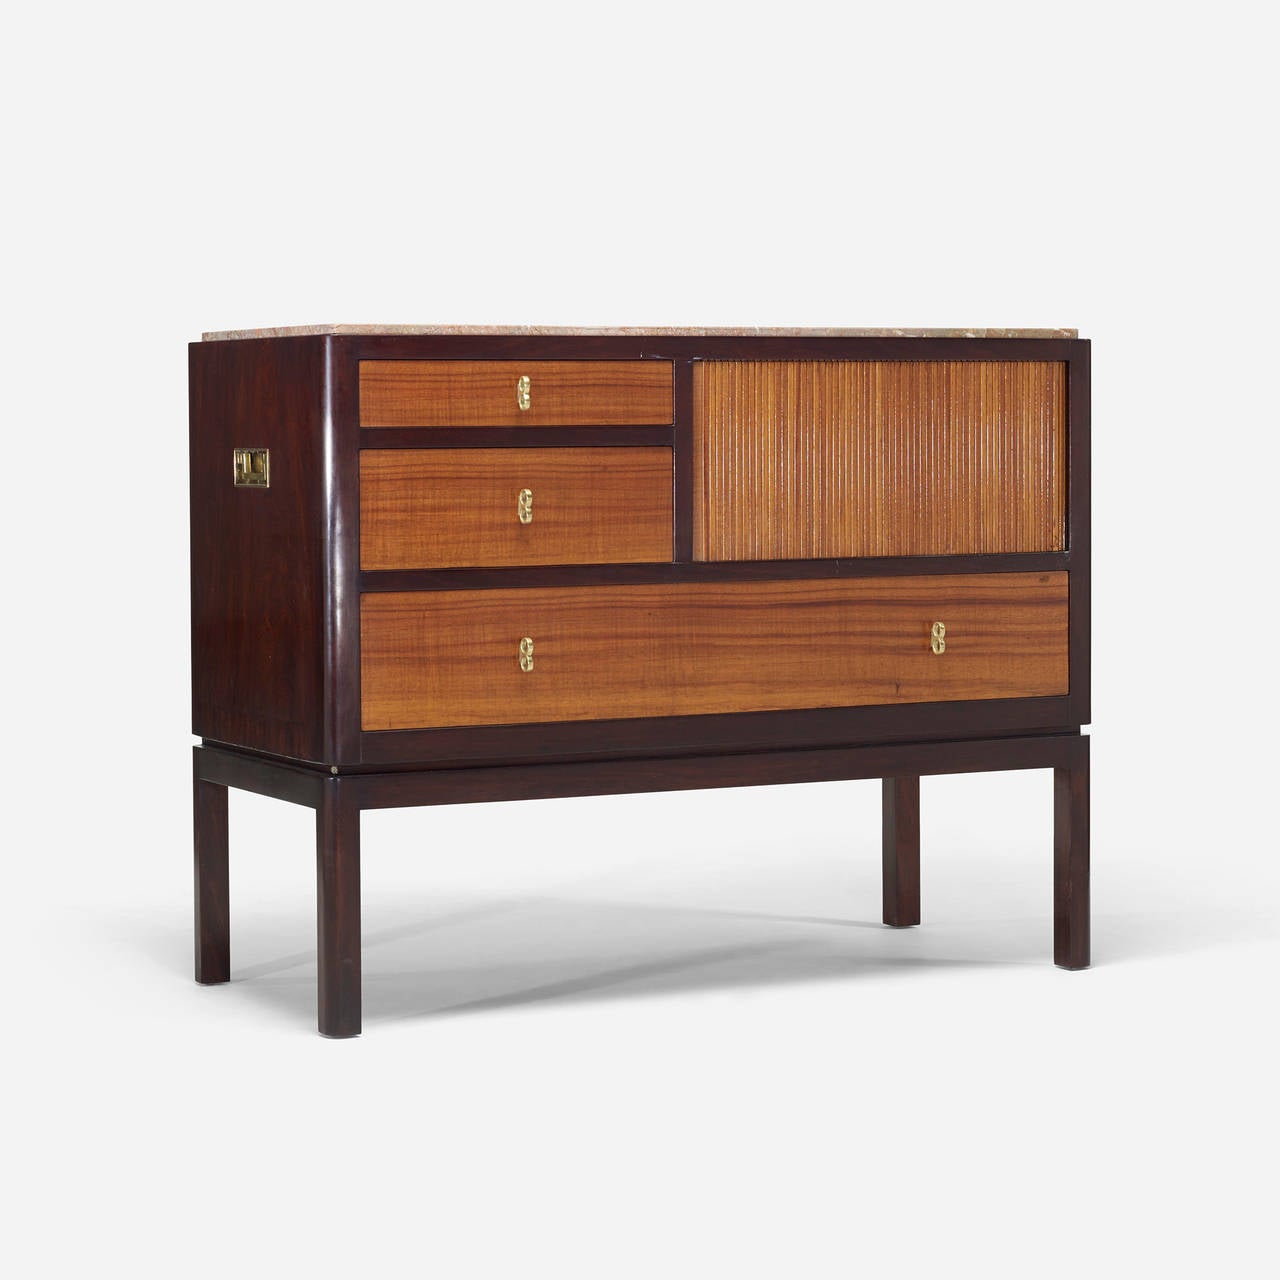 Cabinet features three drawers and one tambour door concealing storage. Signed with applied green metal manufacturer's label to drawer: [Dunbar Berne, Indiana].